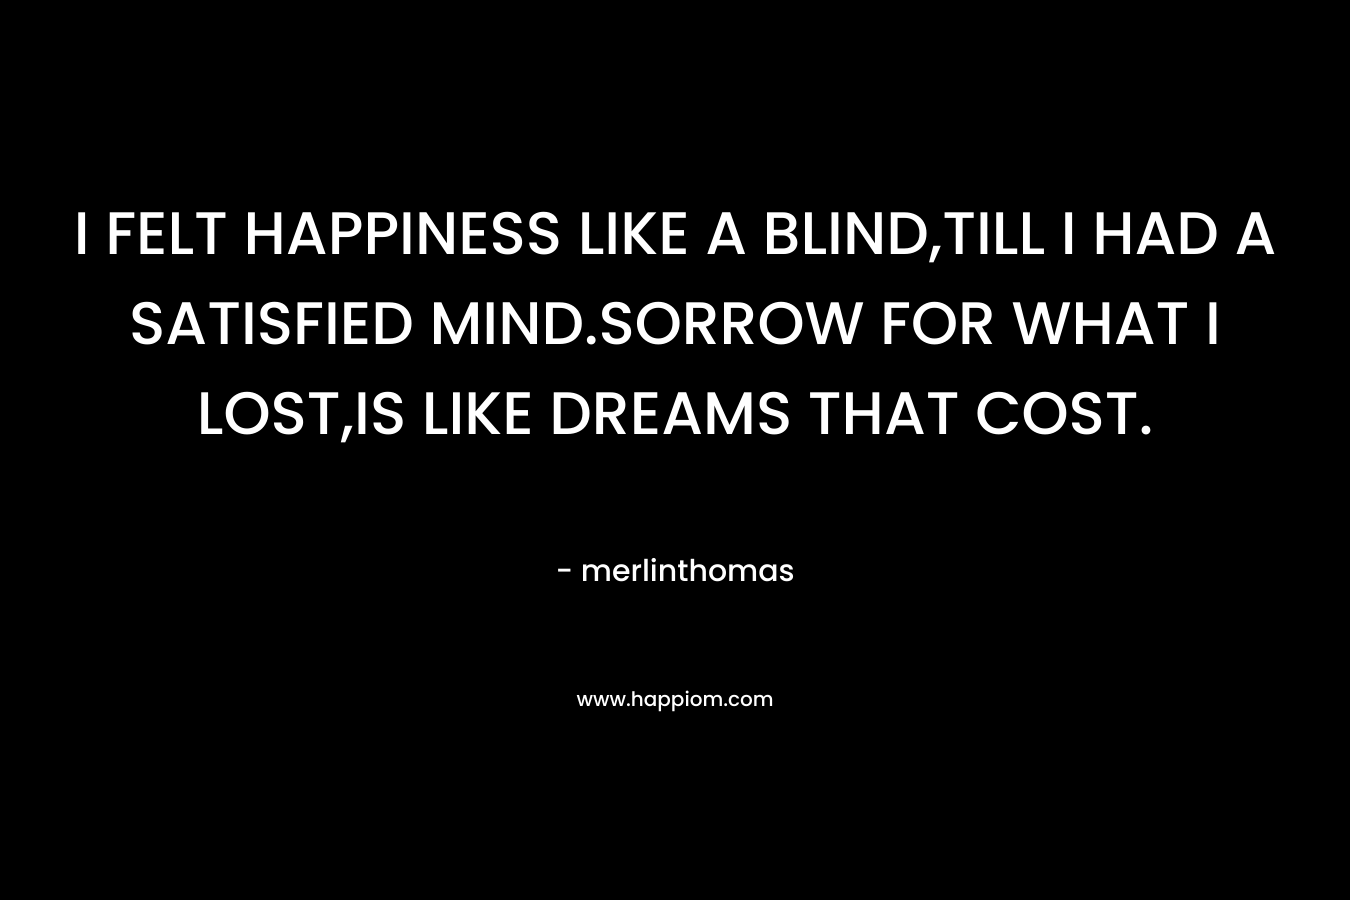 I FELT HAPPINESS LIKE A BLIND,TILL I HAD A SATISFIED MIND.SORROW FOR WHAT I LOST,IS LIKE DREAMS THAT COST. – merlinthomas